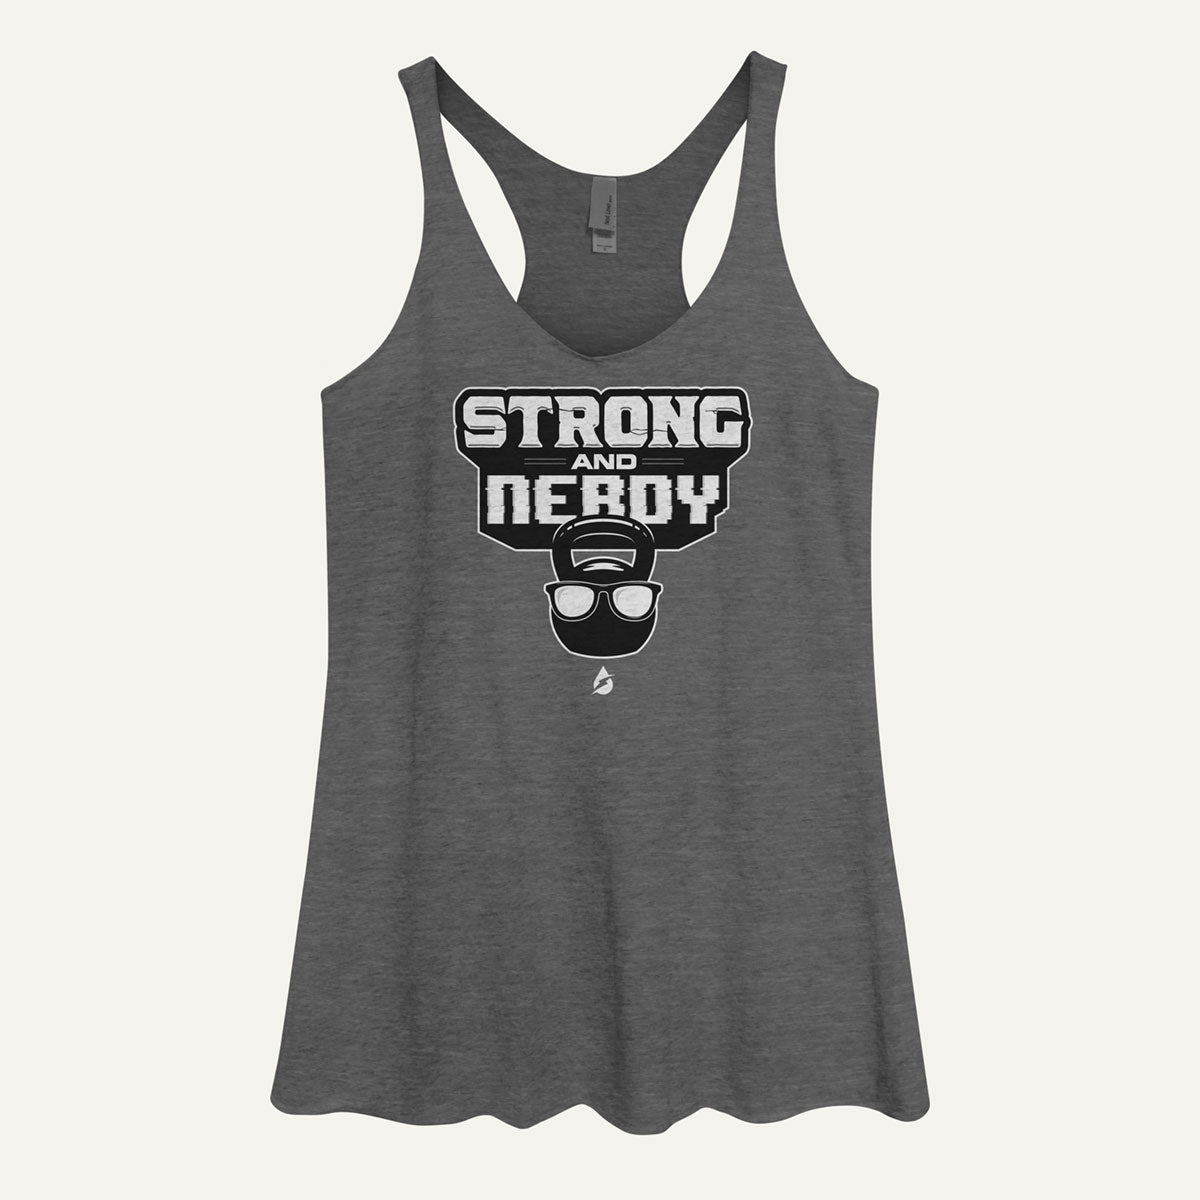 Strong And Nerdy Women's Tank Top